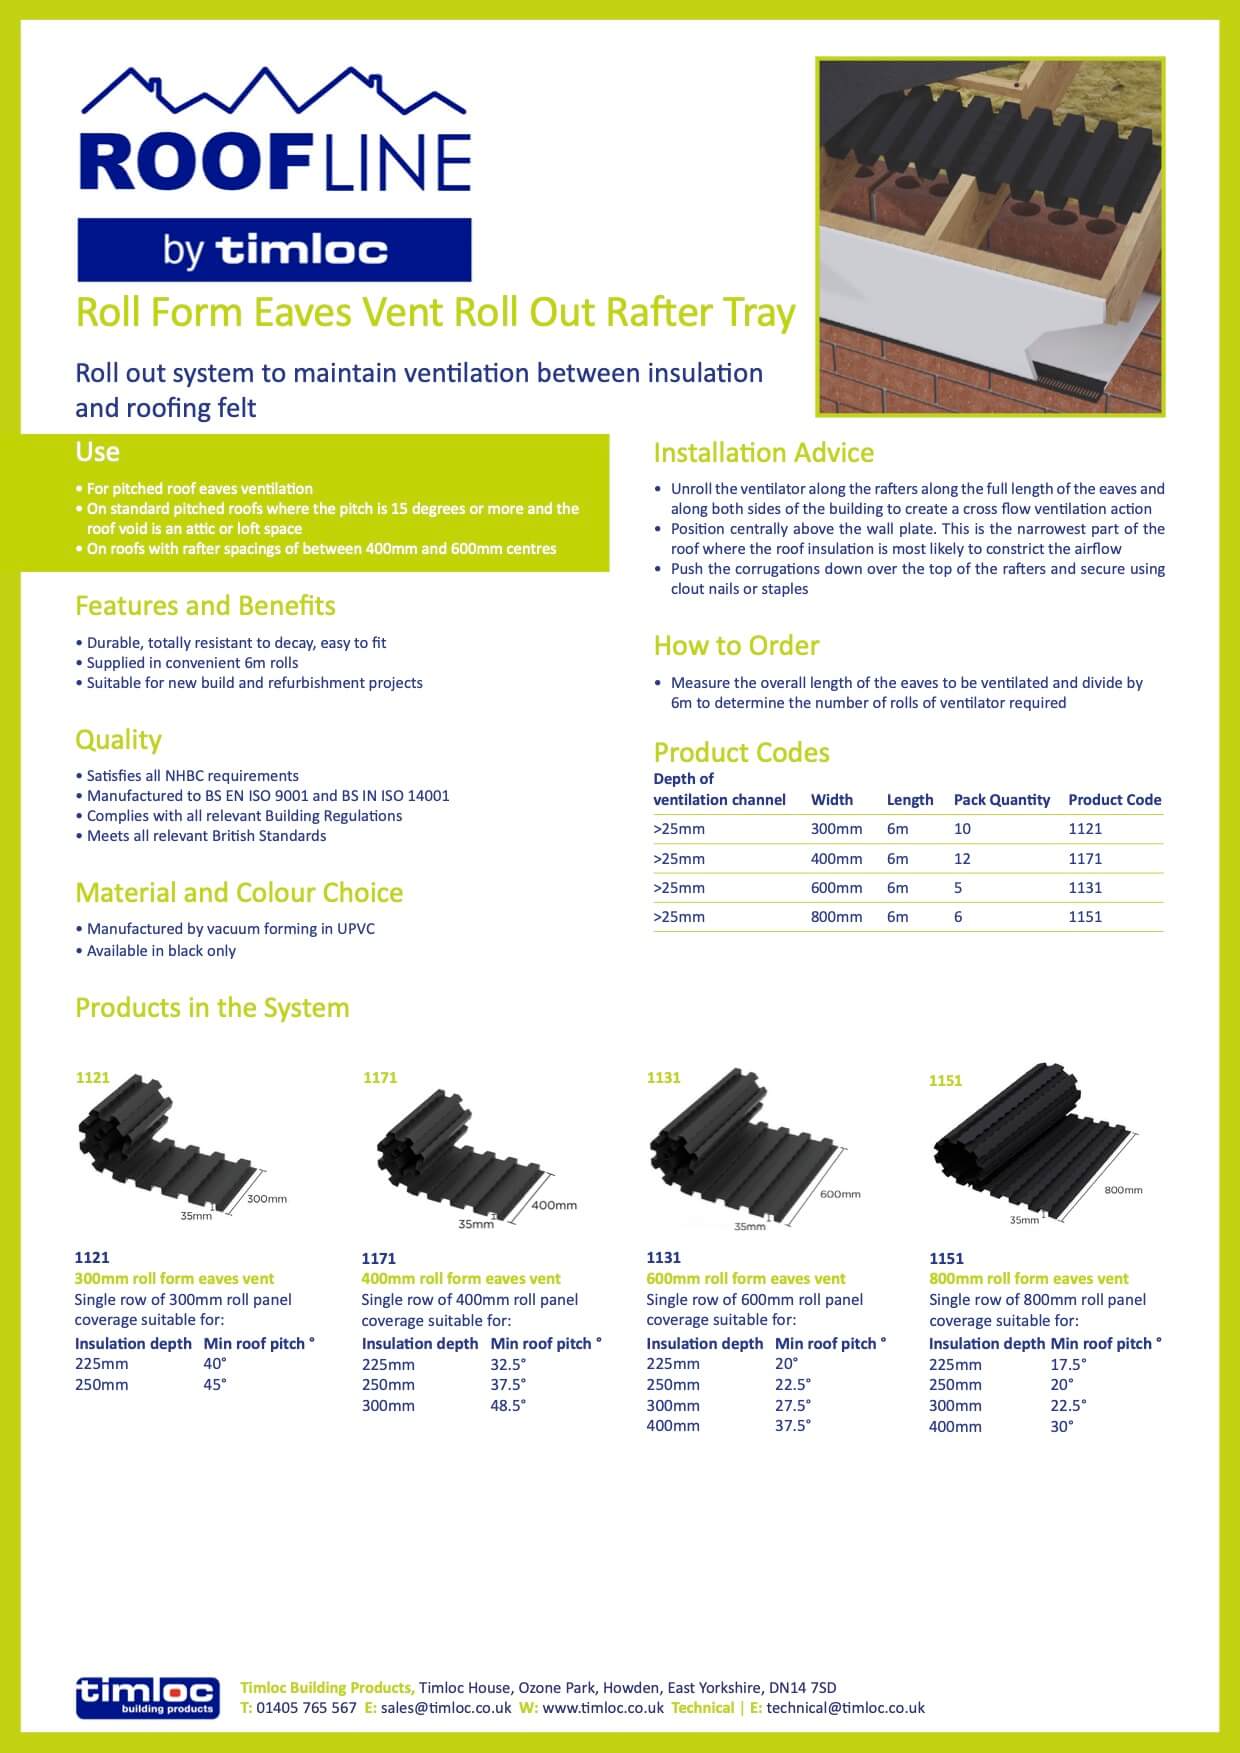 Timloc Building Products Datasheet - 6M Roll Out Rafter Tray